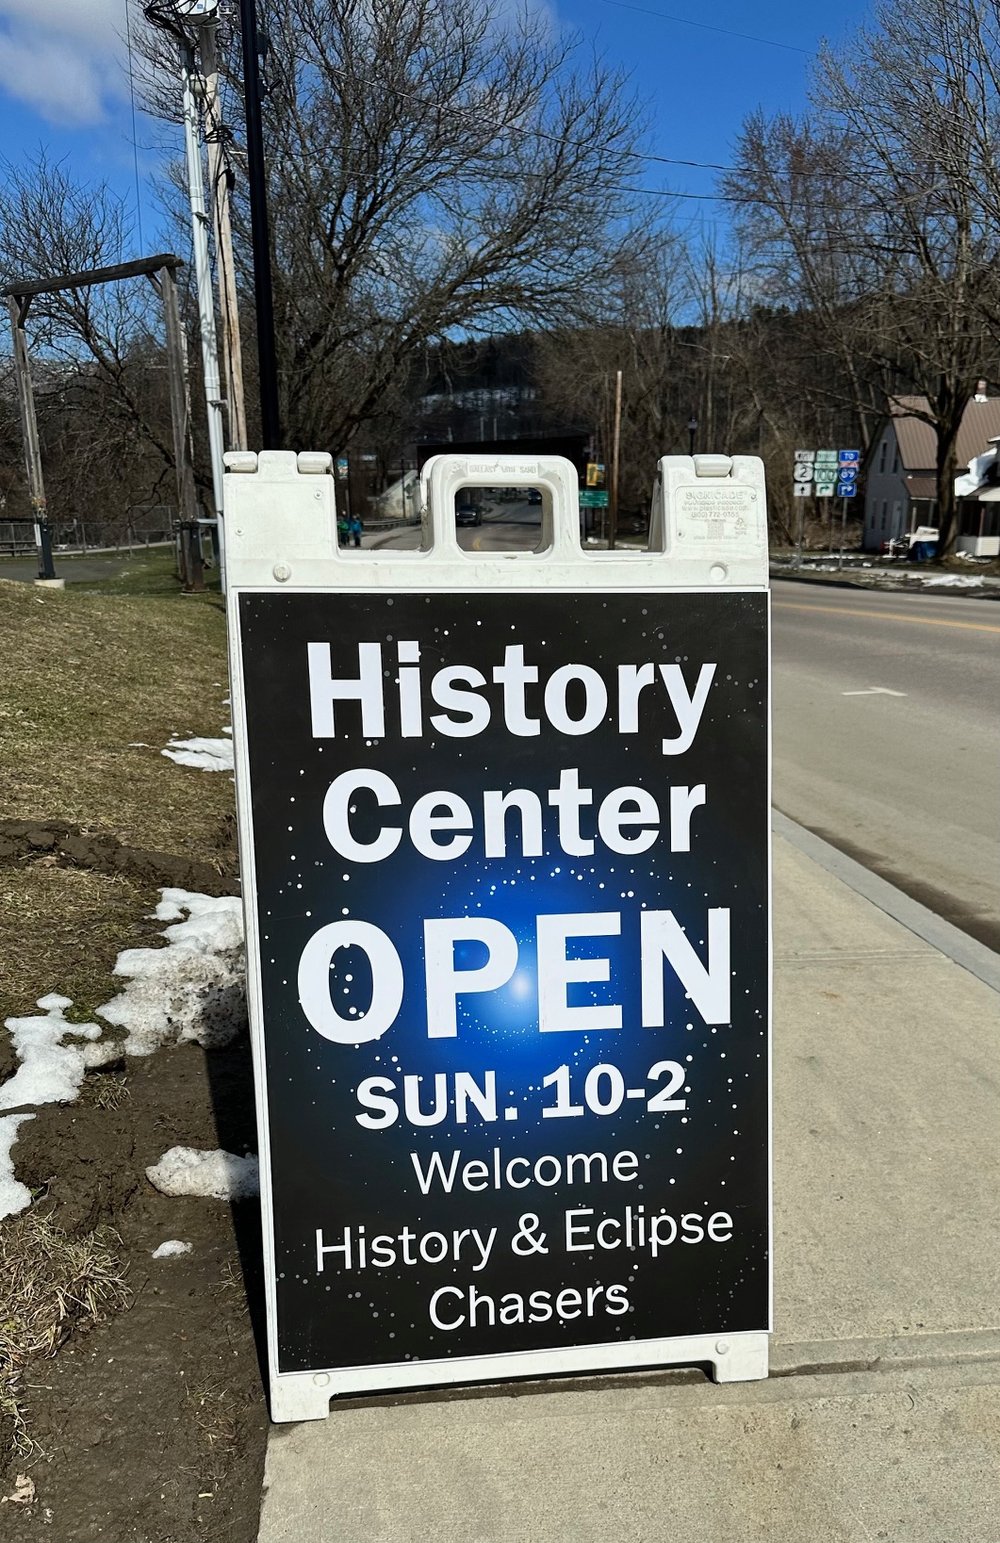   Sunday was a busy day in town with many spots open for visitors including the Waterbury History Center. Photo by Cheryl Casey  